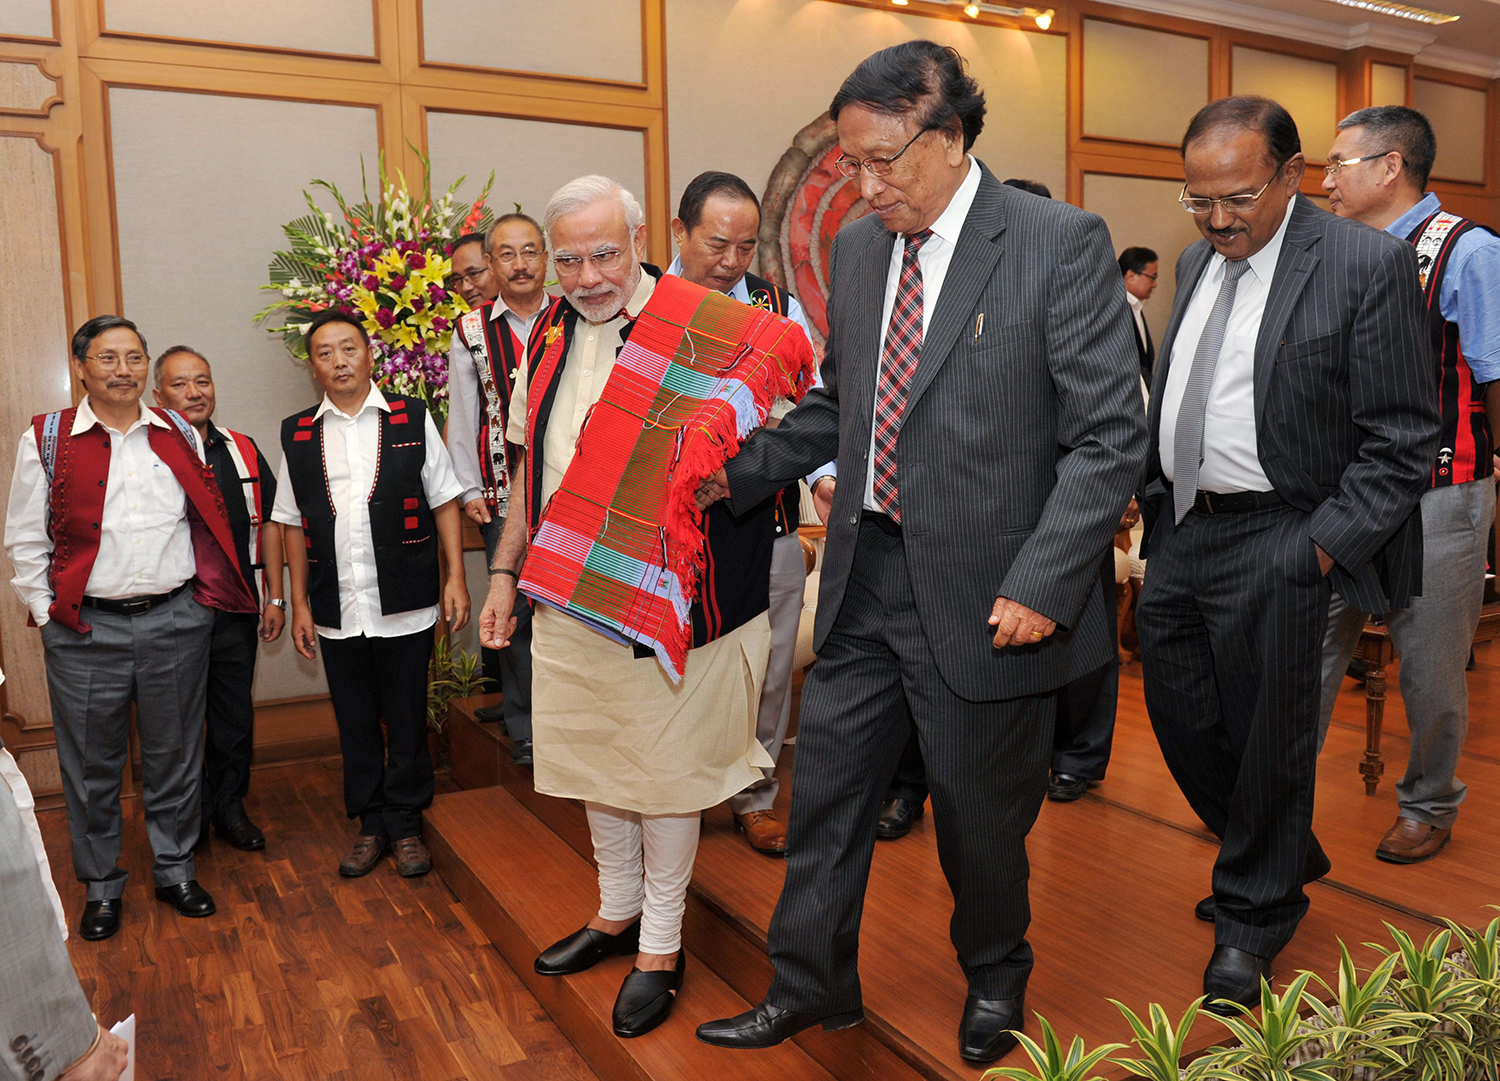 The Indian government’s hawkish approach threatens Naga peace talks